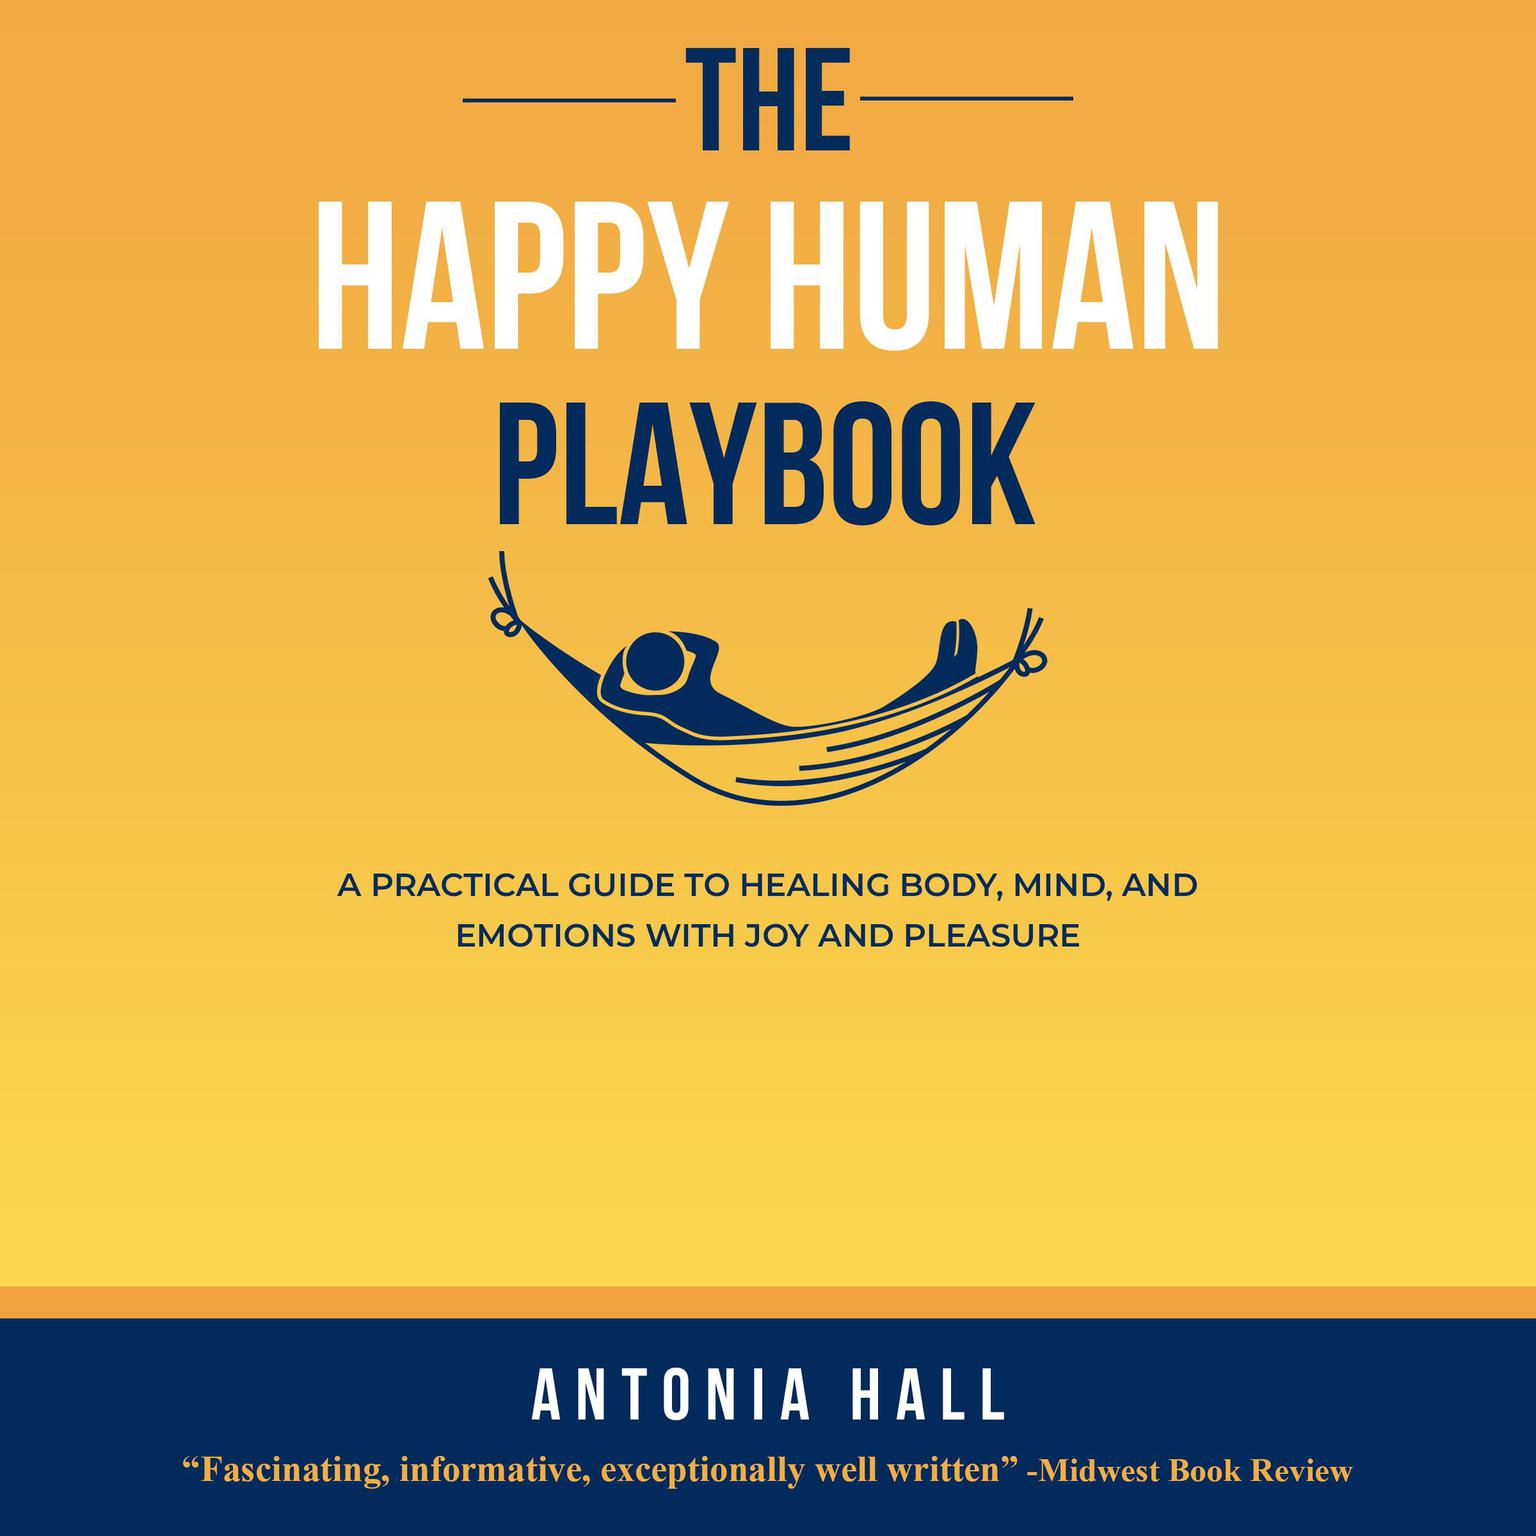 The Happy Human Playbook: A Practical Guide to Healing Body, Mind and Emotions With Joy and Pleasure, 2nd Edition Audiobook, by Antonia Hall